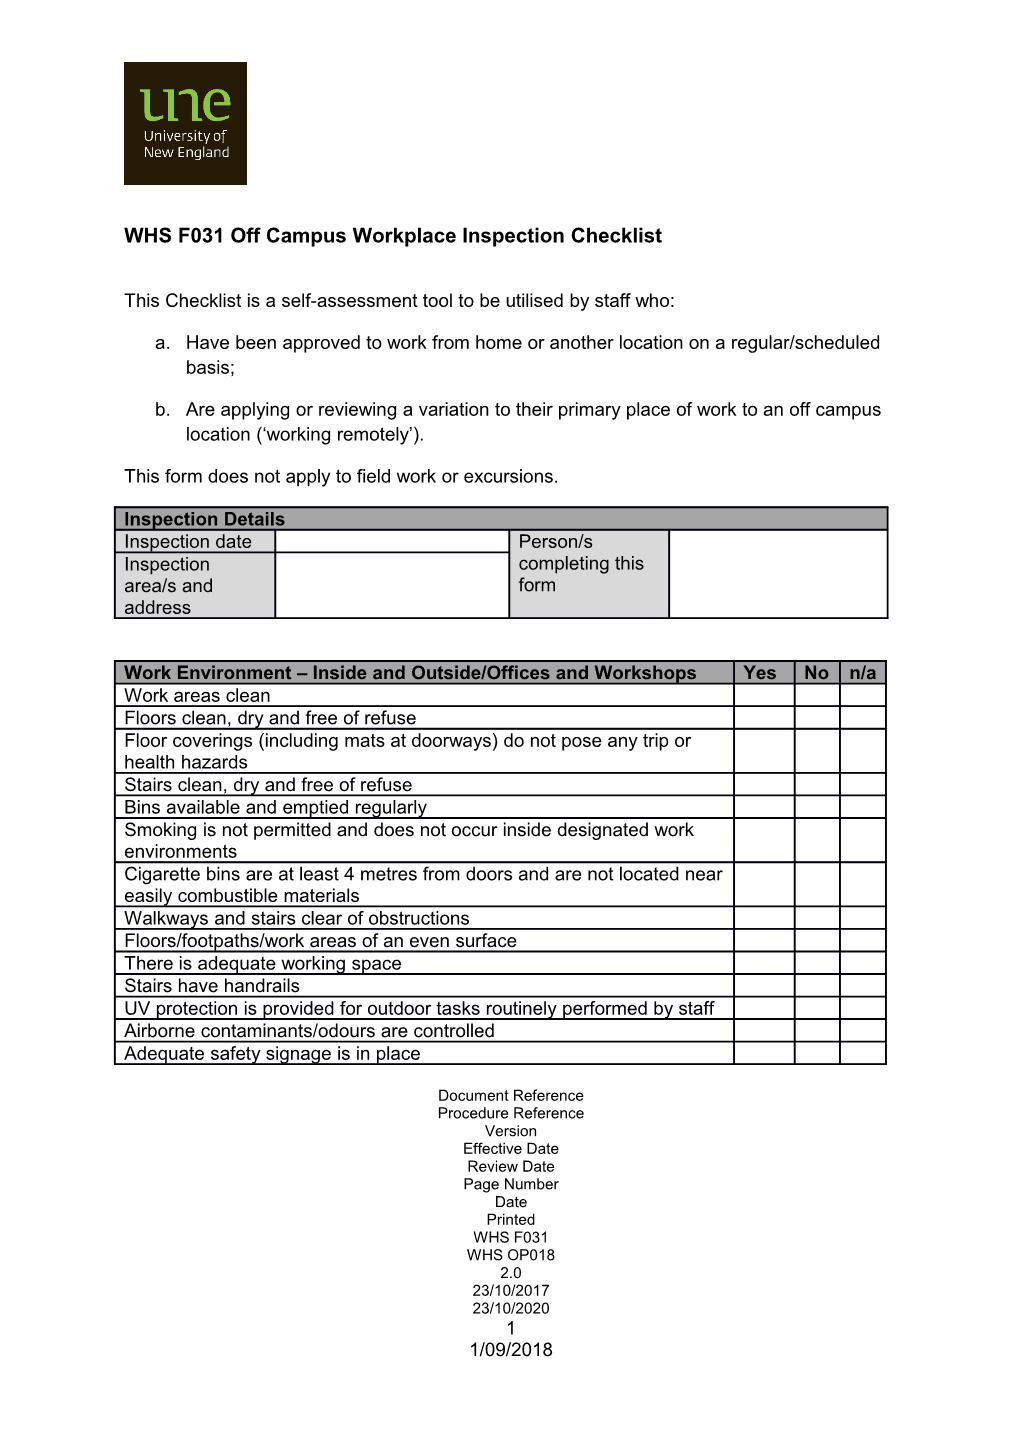 This Checklist Is a Self-Assessment Tool to Be Utilised by Staff Who